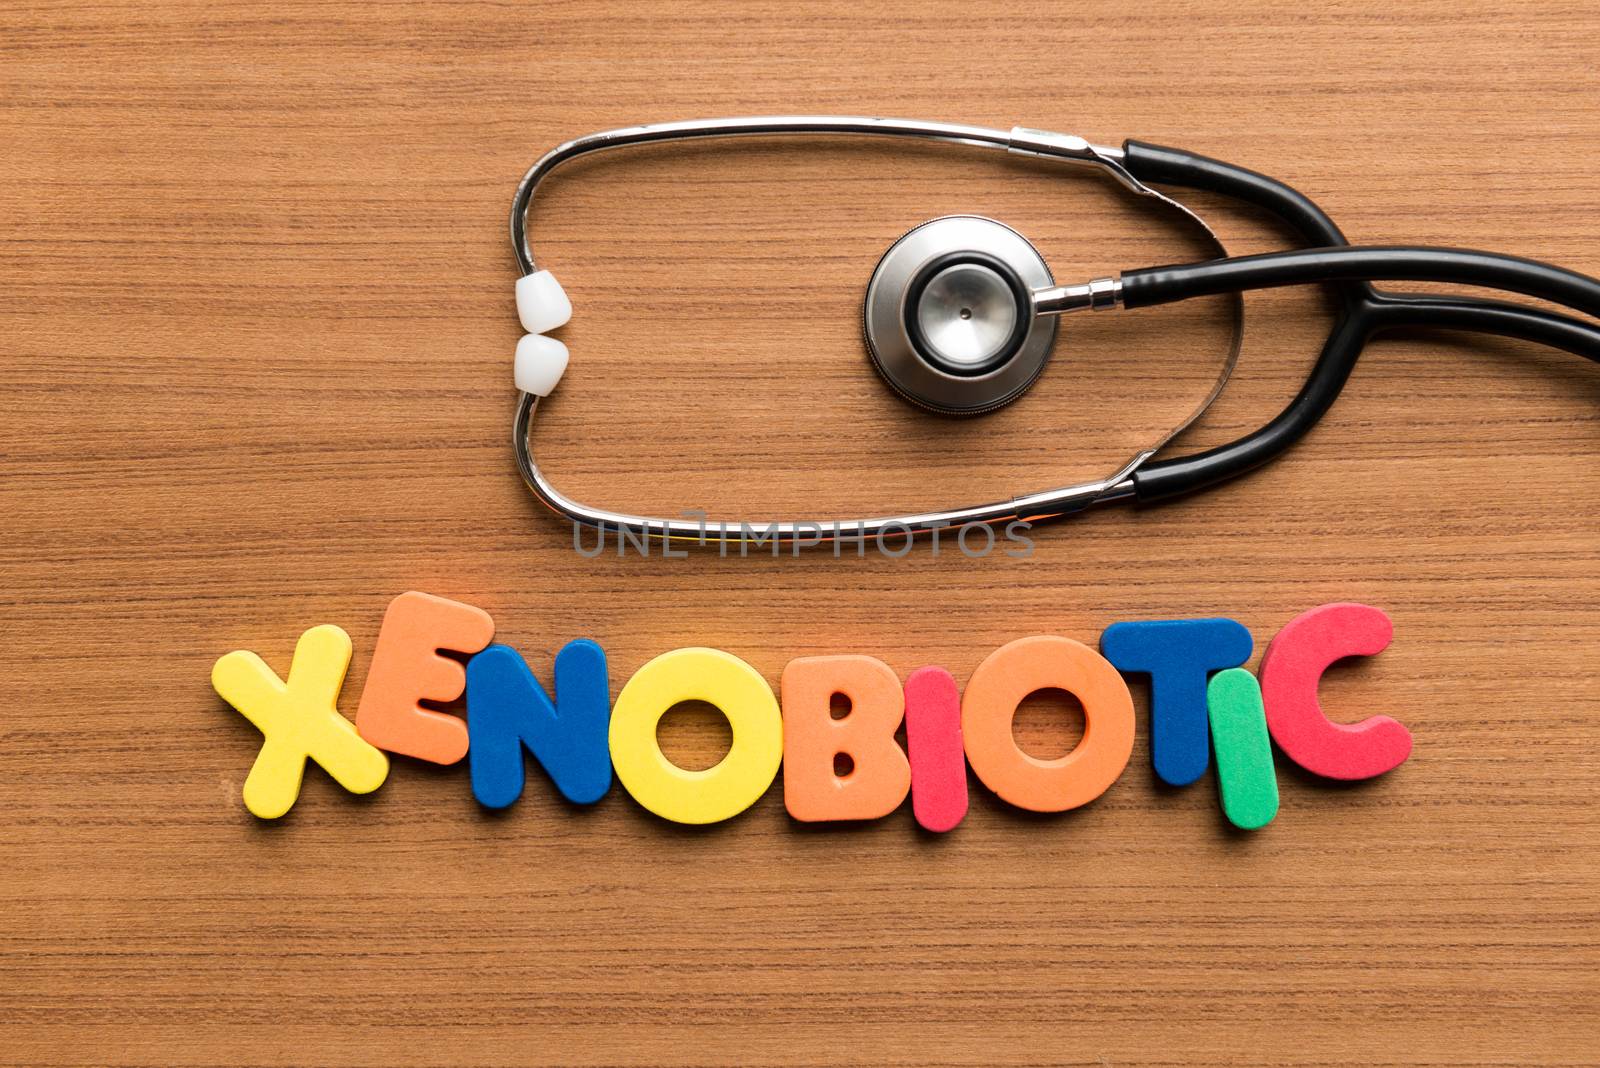 xenobiotic colorful word with stethoscope on wooden background